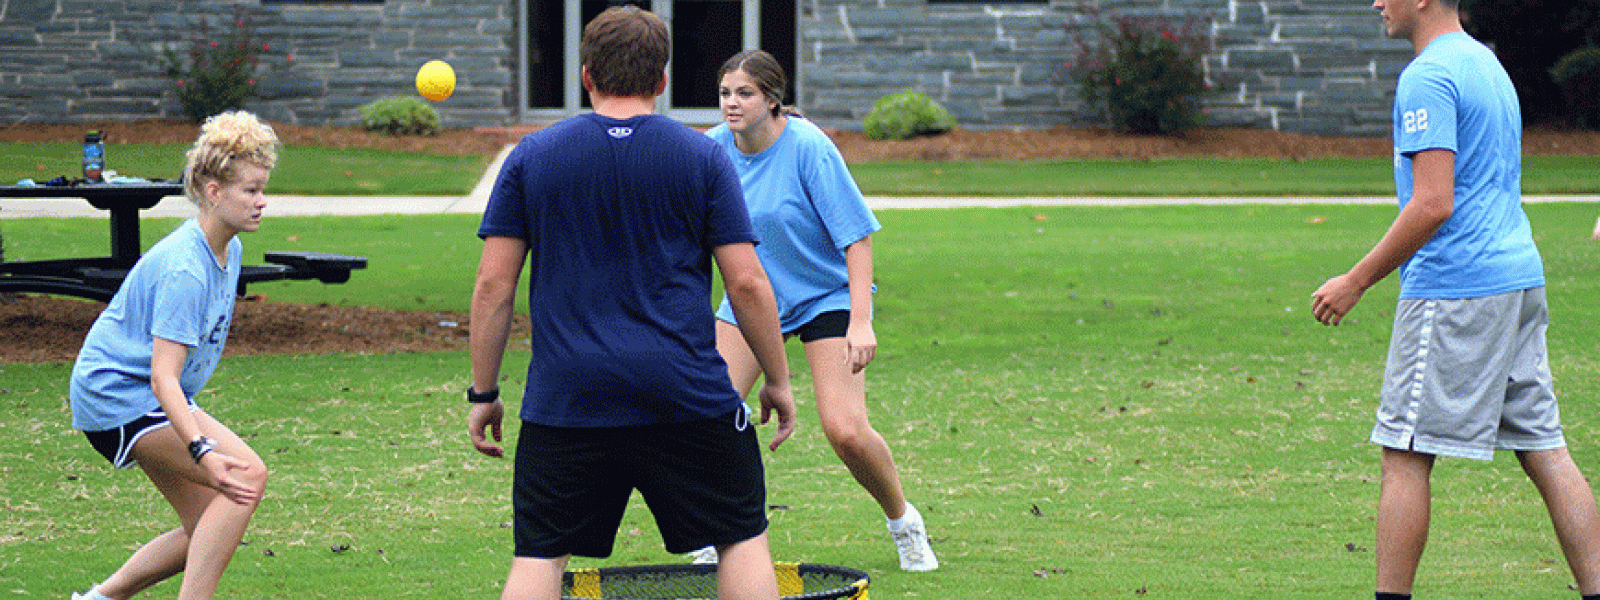 Spikeball in The Quad brought students together on Welcome Weekend.